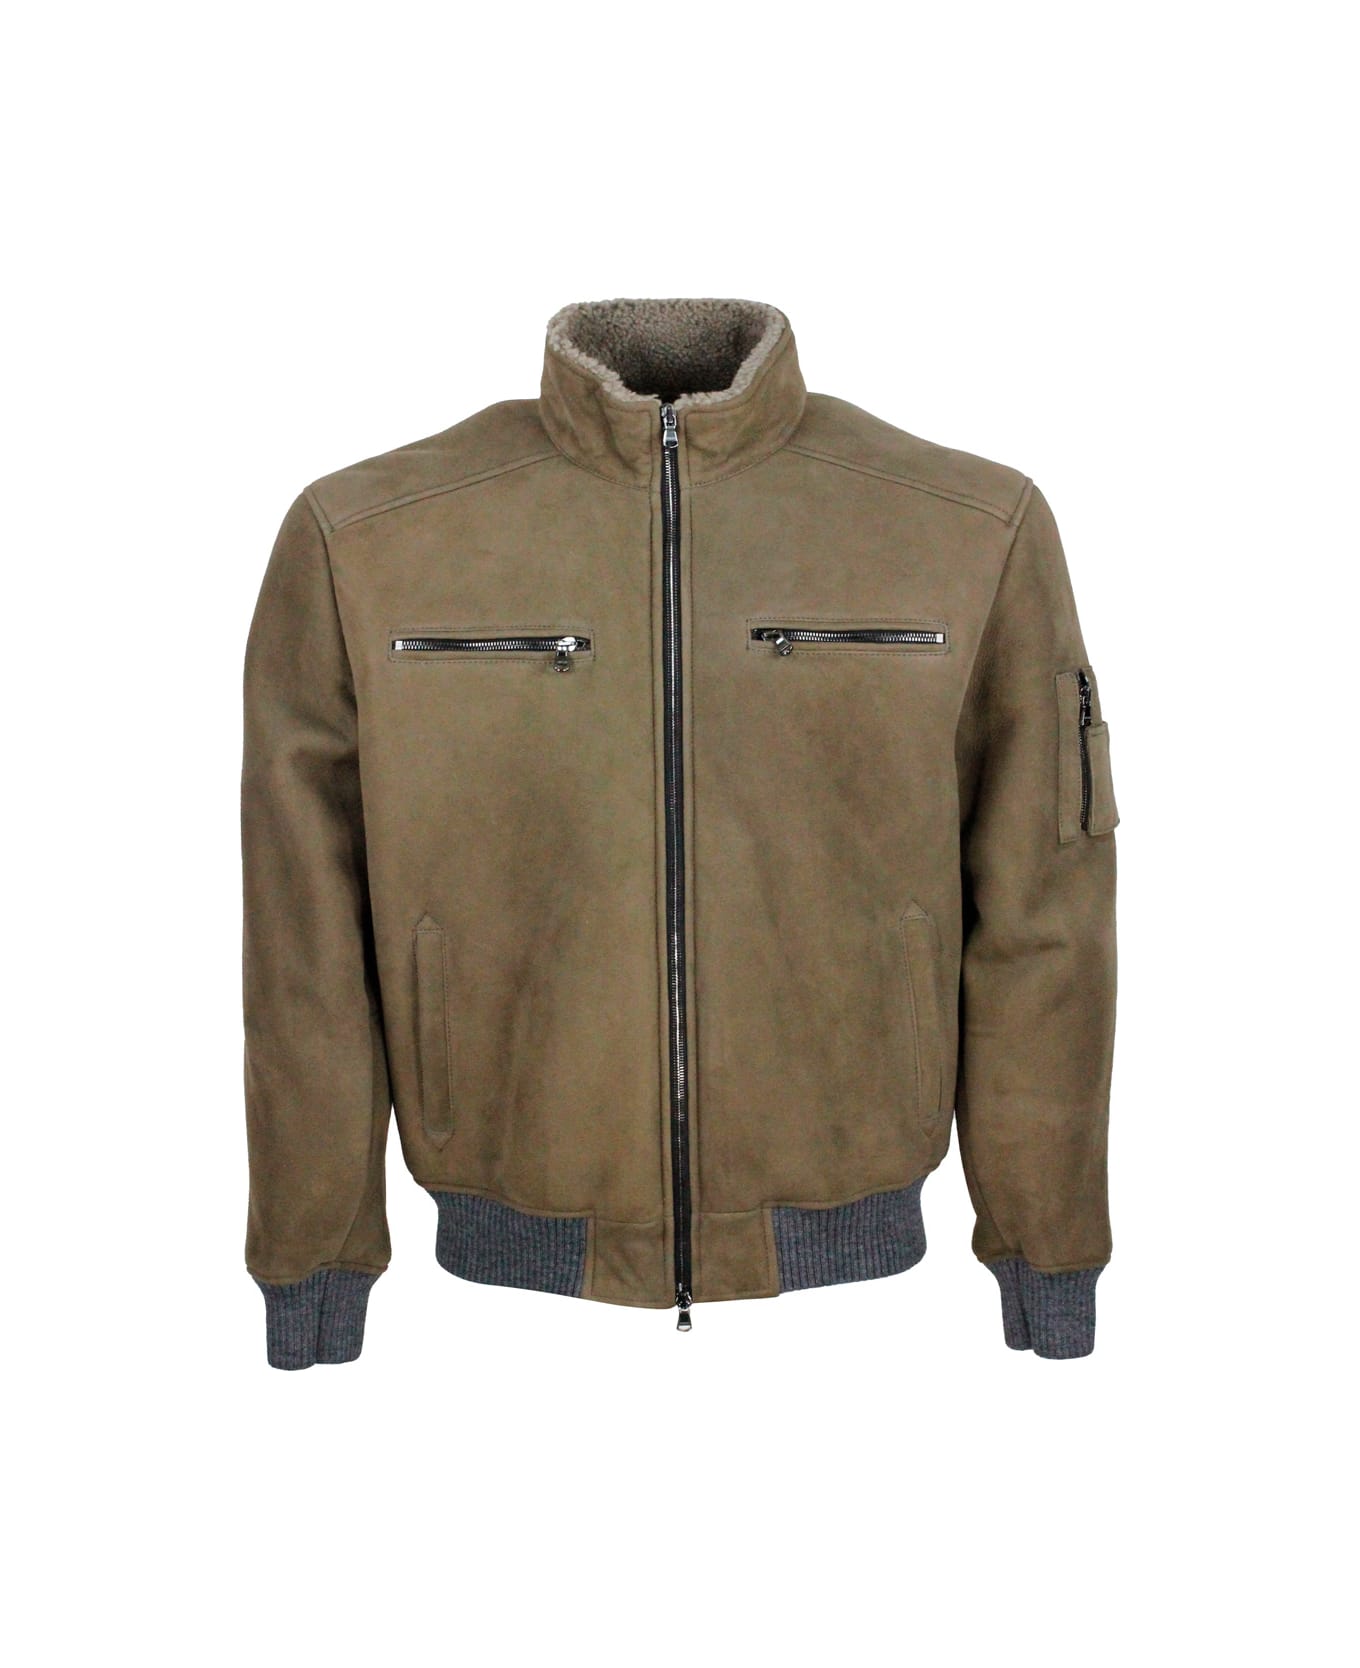 Barba Napoli Bomber Jacket In Fine And Soft Shearling Sheepskin With Stretch Knit Trims And Zip Closure. Front Pockets - Taupe